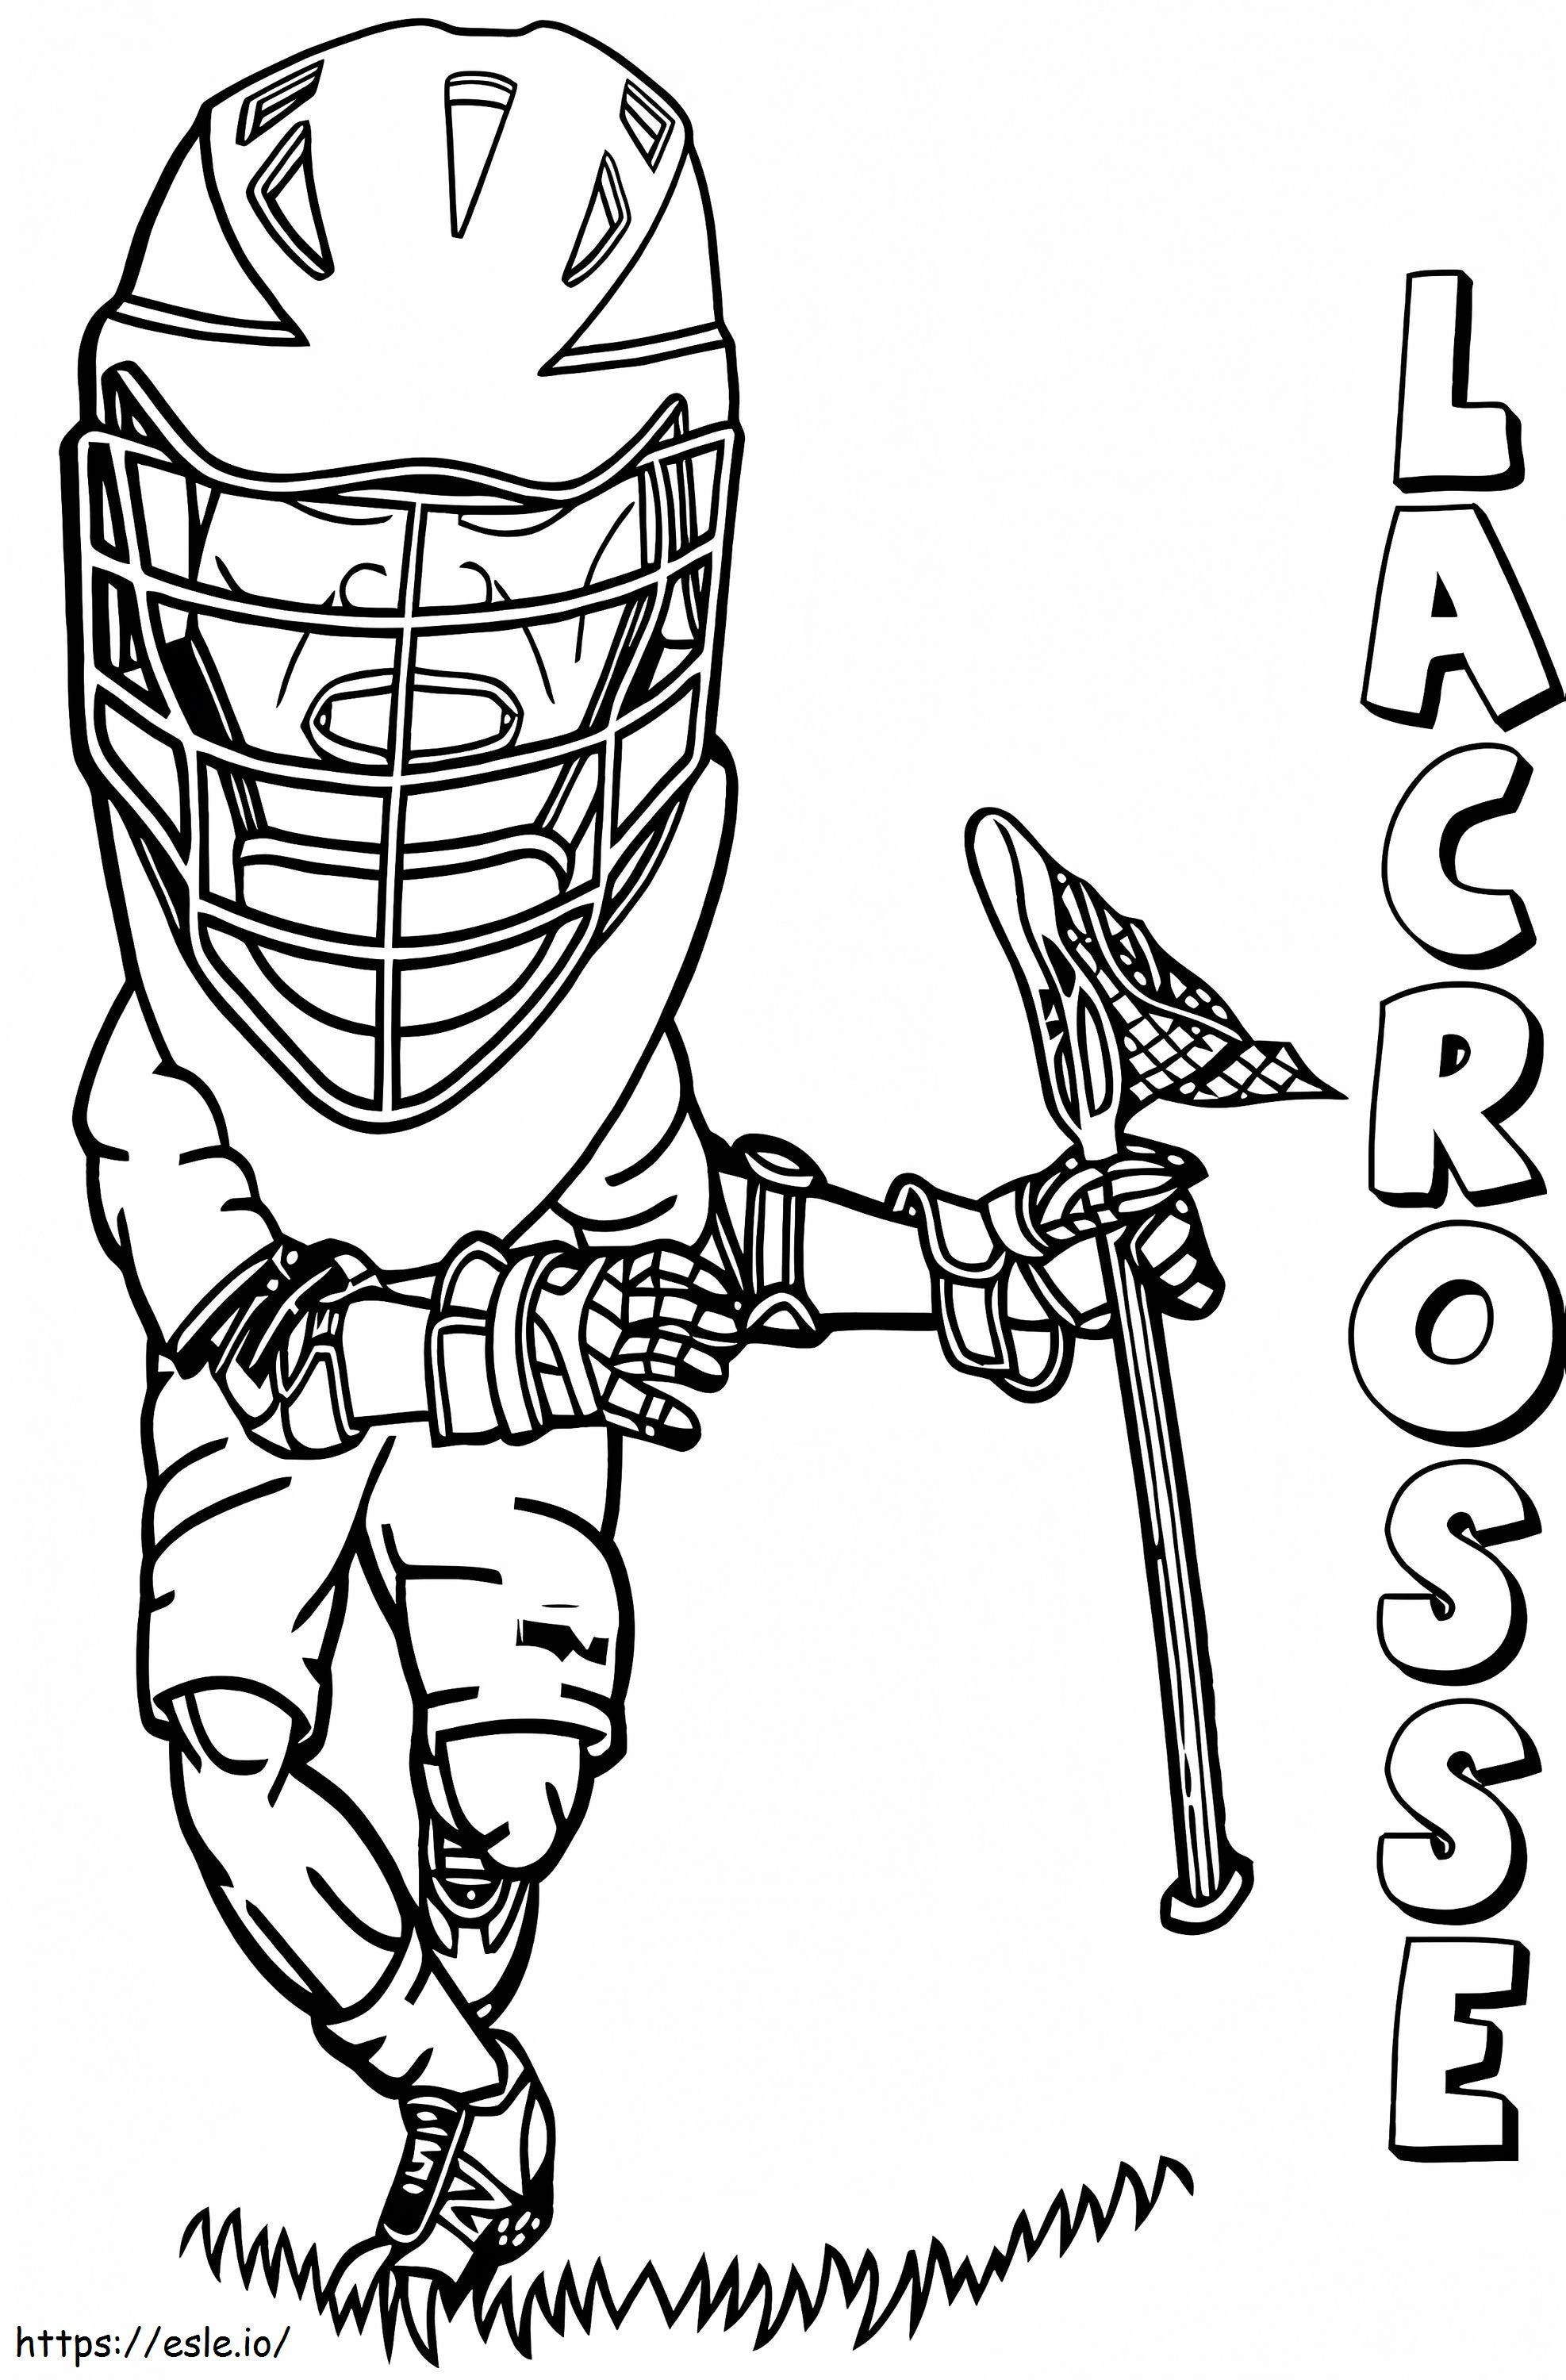 Lacrosse5 coloring page